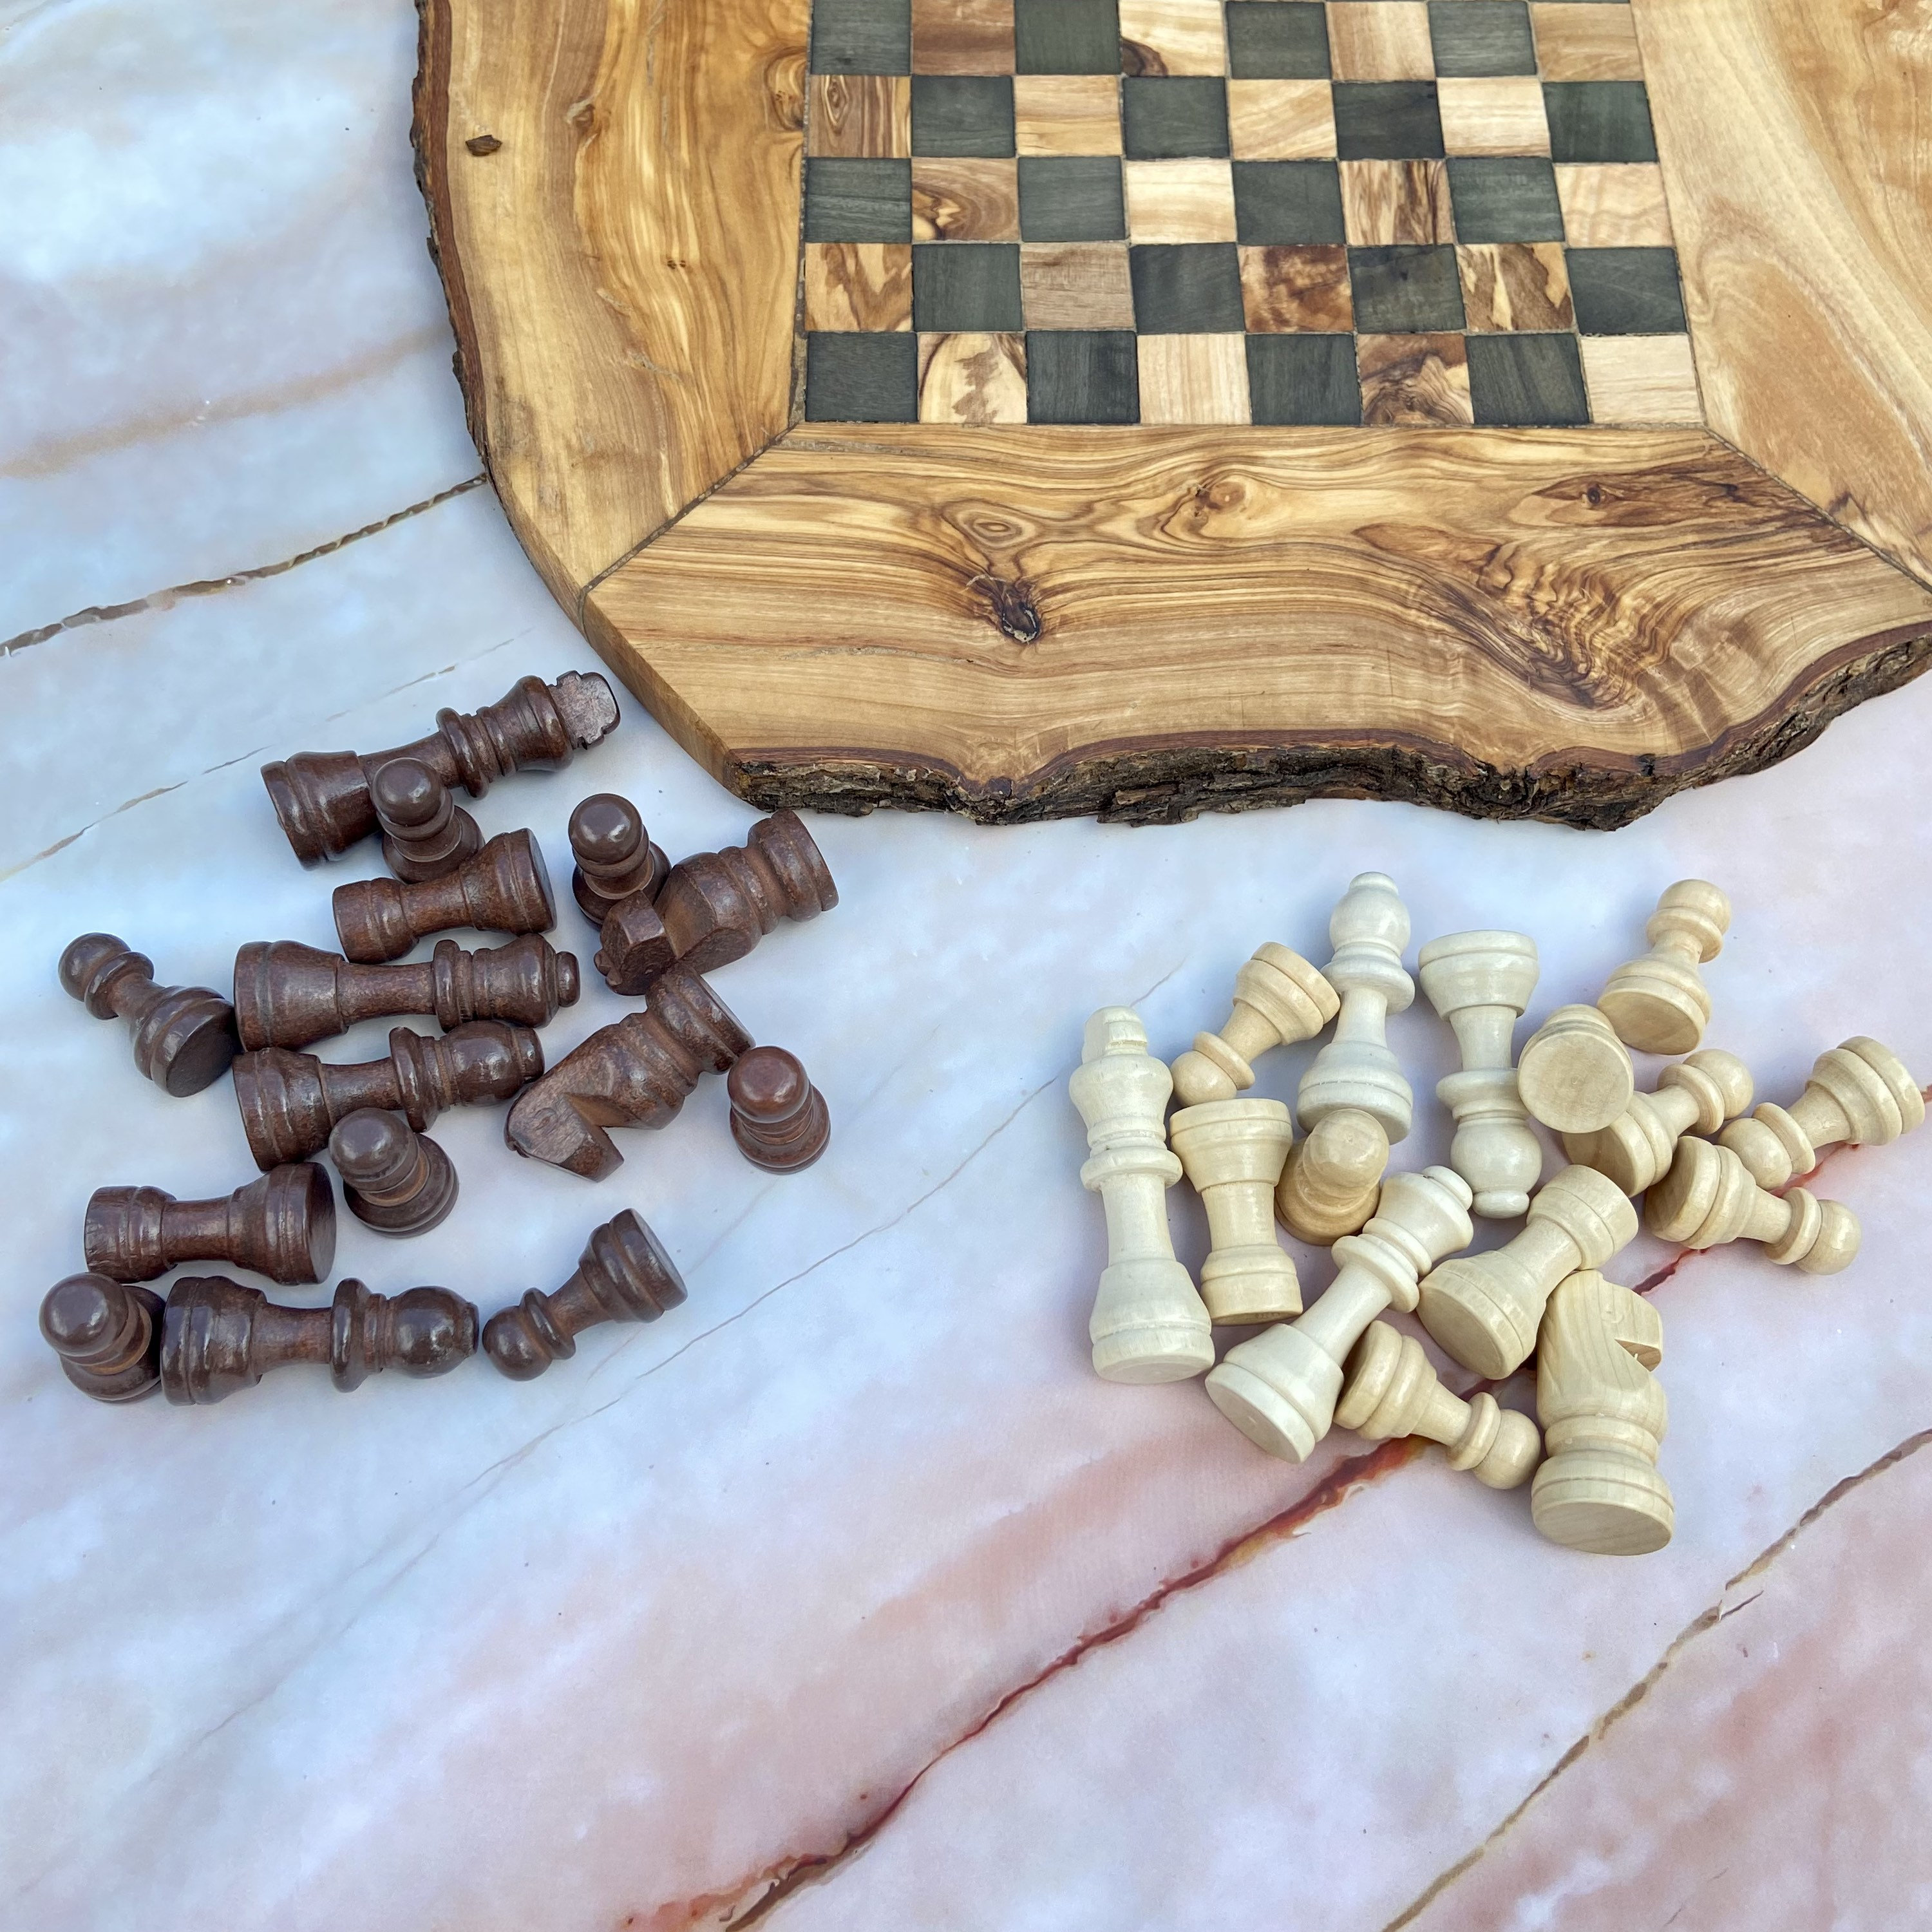 Buy Cultural Hub ® J92-2700-0004 Collectible Greek and Roman Brass  Handcrafted Chess Pieces with Foldable Wooden Chess Board for Chess Fans  and Upcoming Grandmasters Online at Low Prices in India 